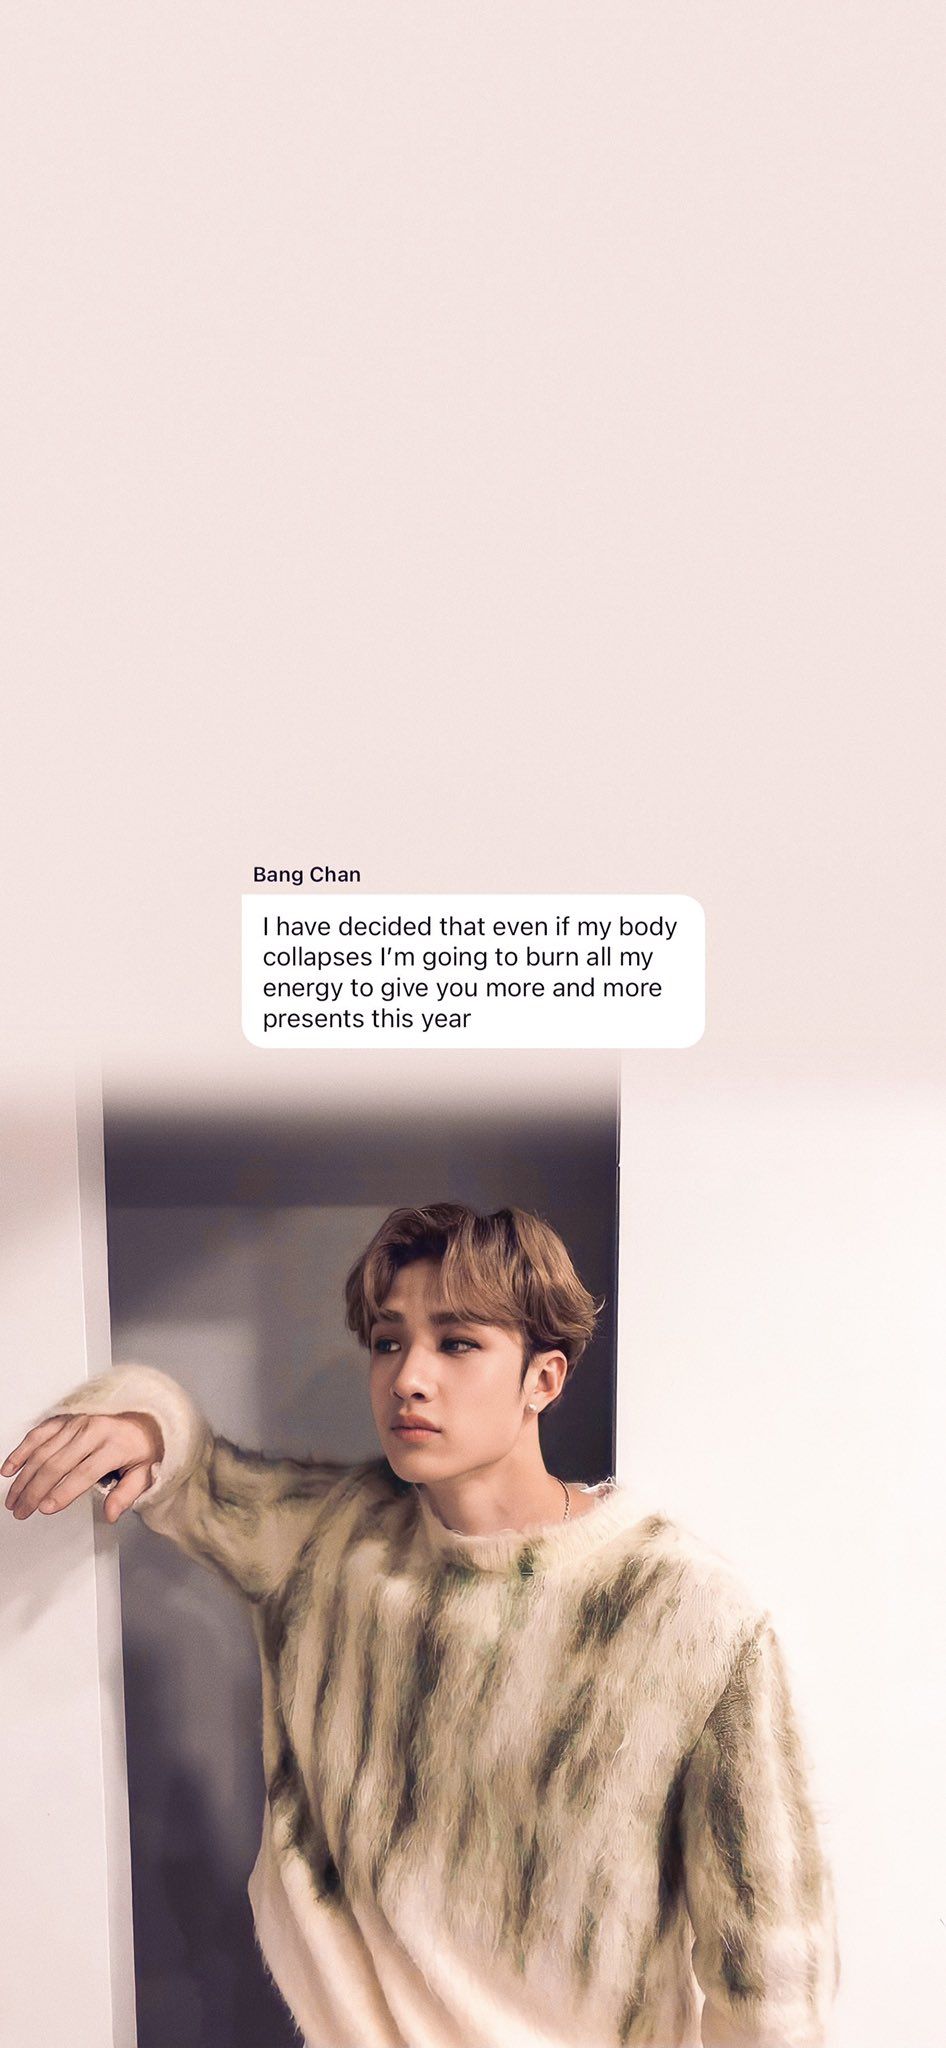 This is a photo of a person leaning against a wall. - Bang Chan